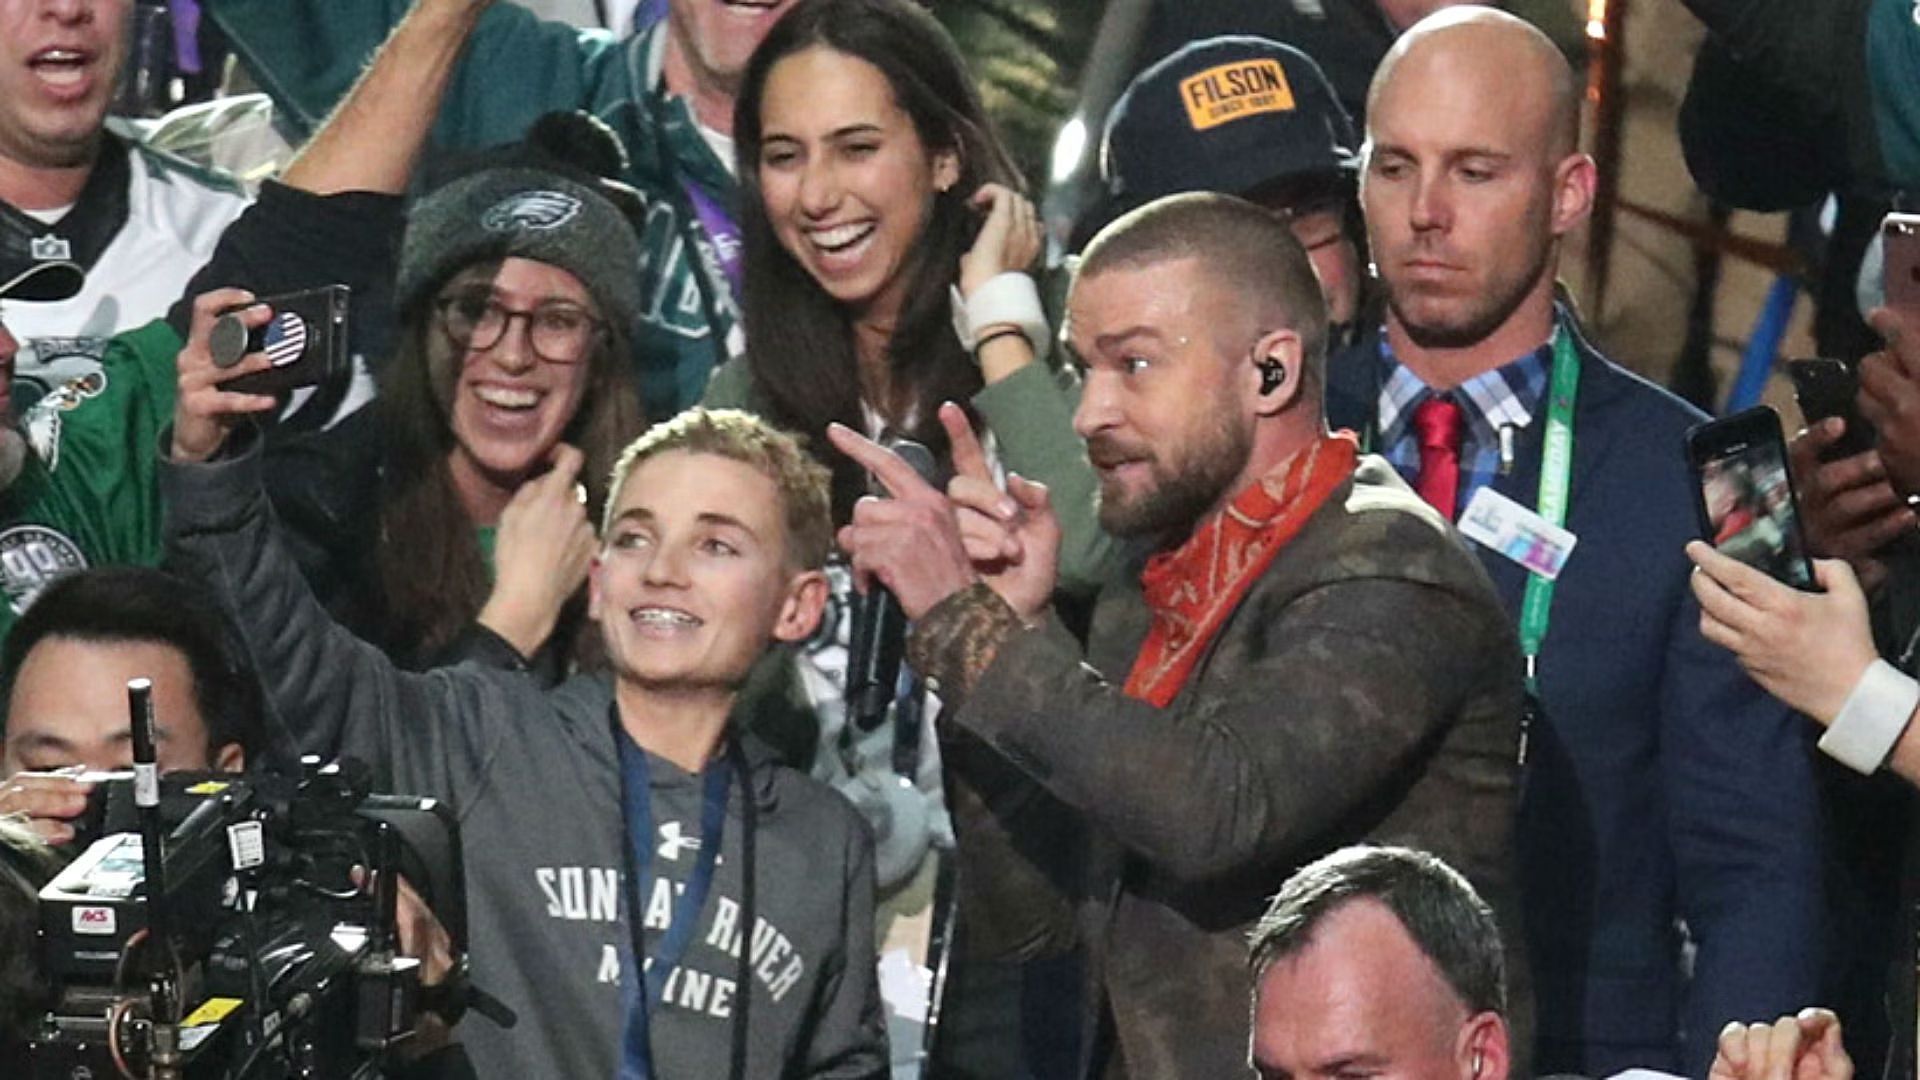 Ryan McKenna Violates Probation By Drinking Alcohol: Super Bowl Selfie Kid In Legal Trouble Again